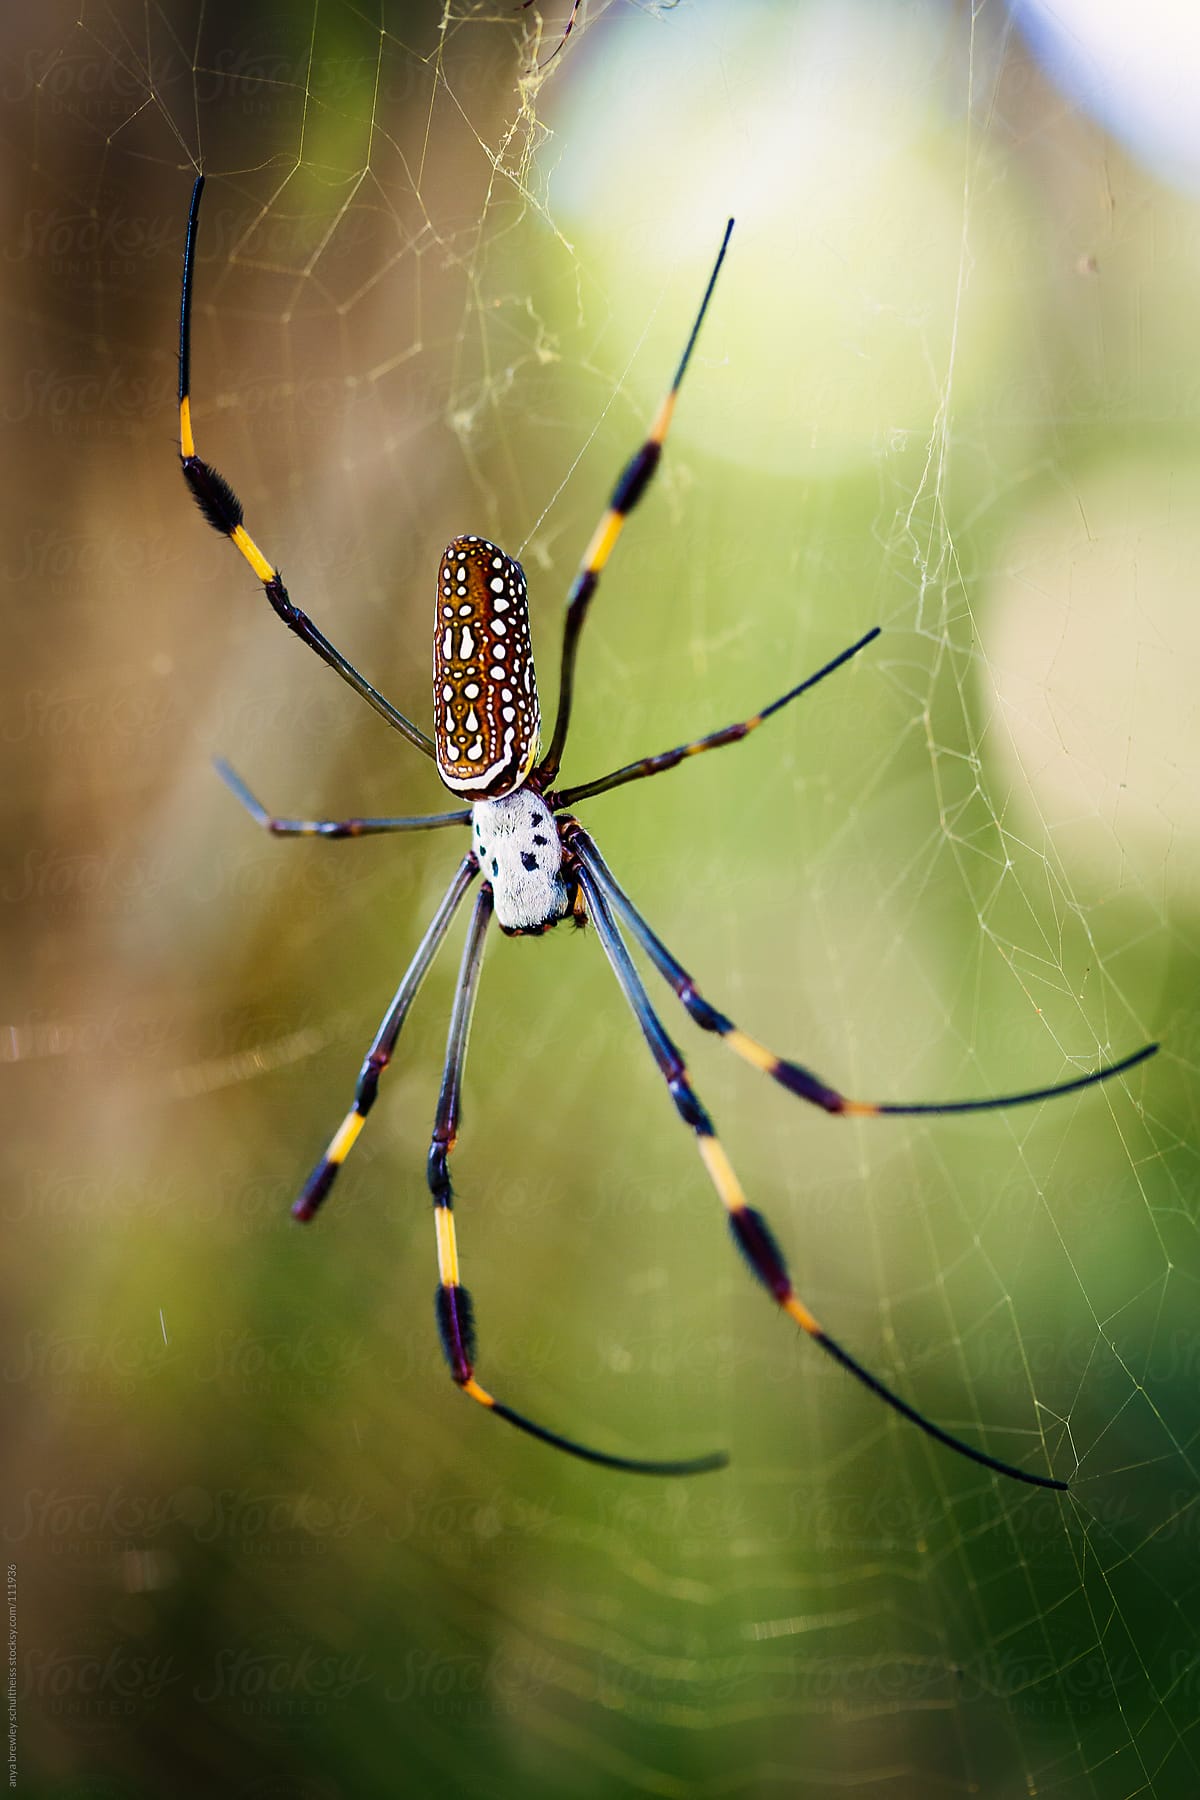 Closeup of a spider with speckled abdomen on a web